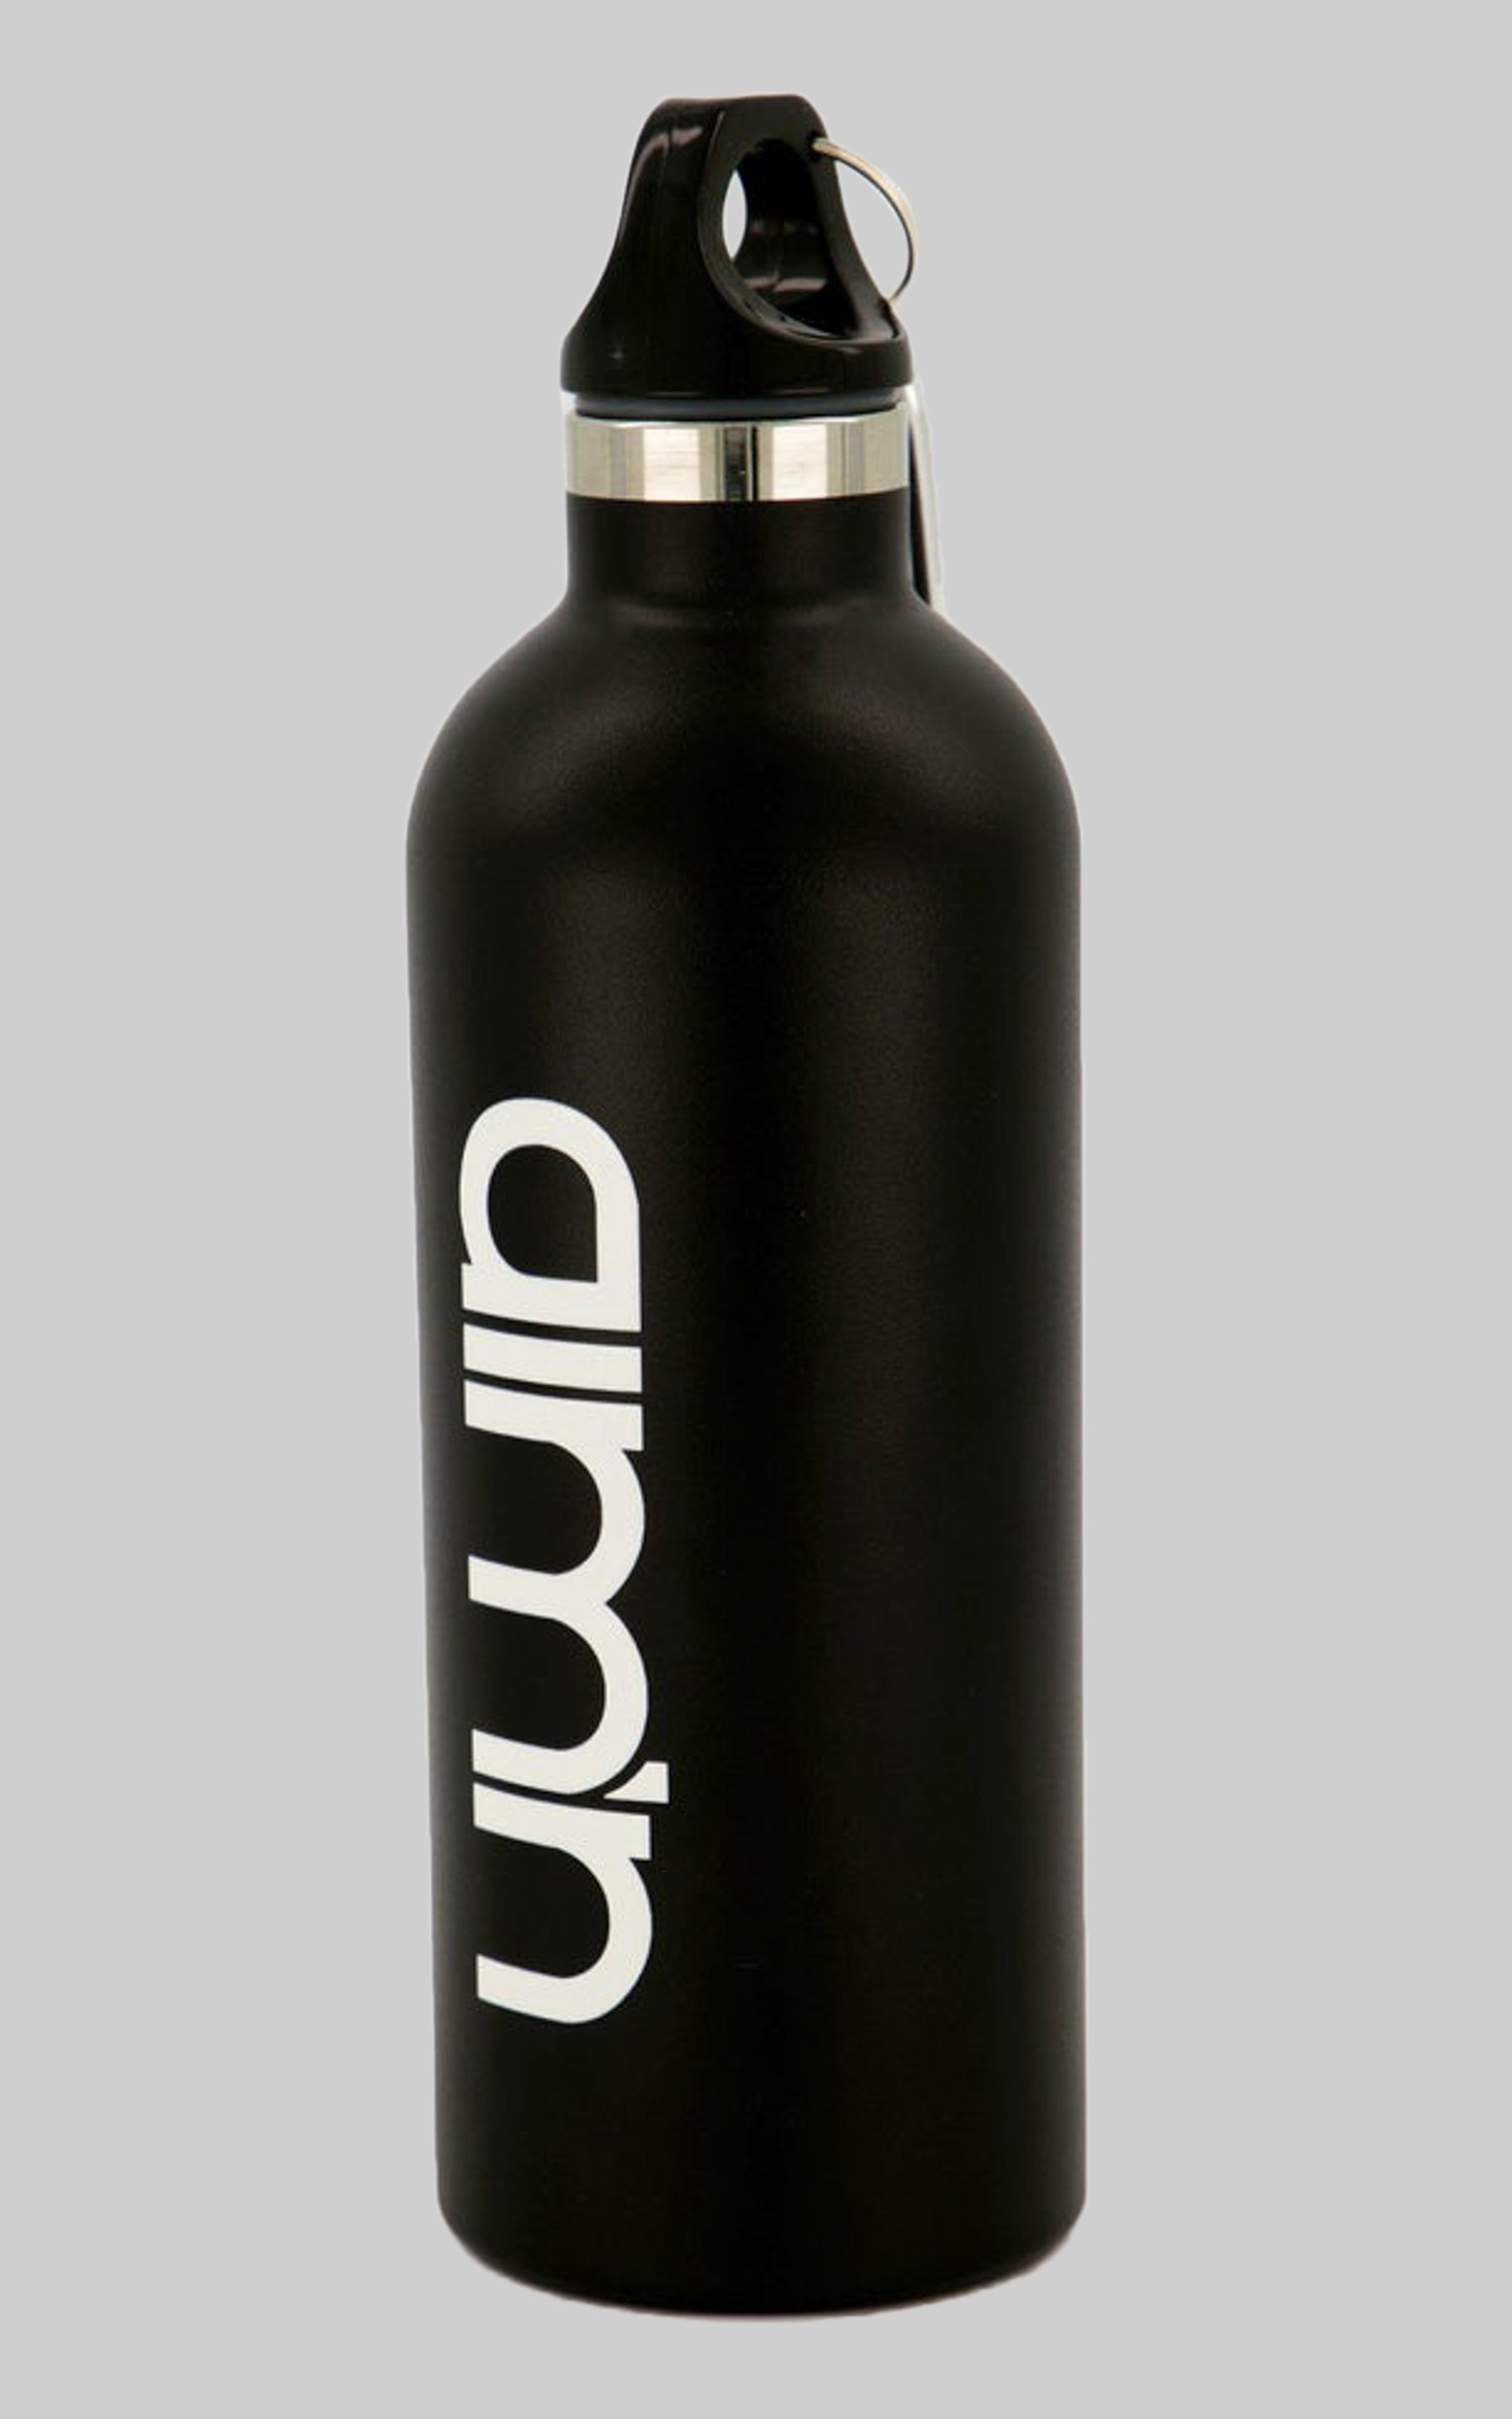 Aim'n - Hydrate Water Bottle in Black - NoSize, BLK1, hi-res image number null